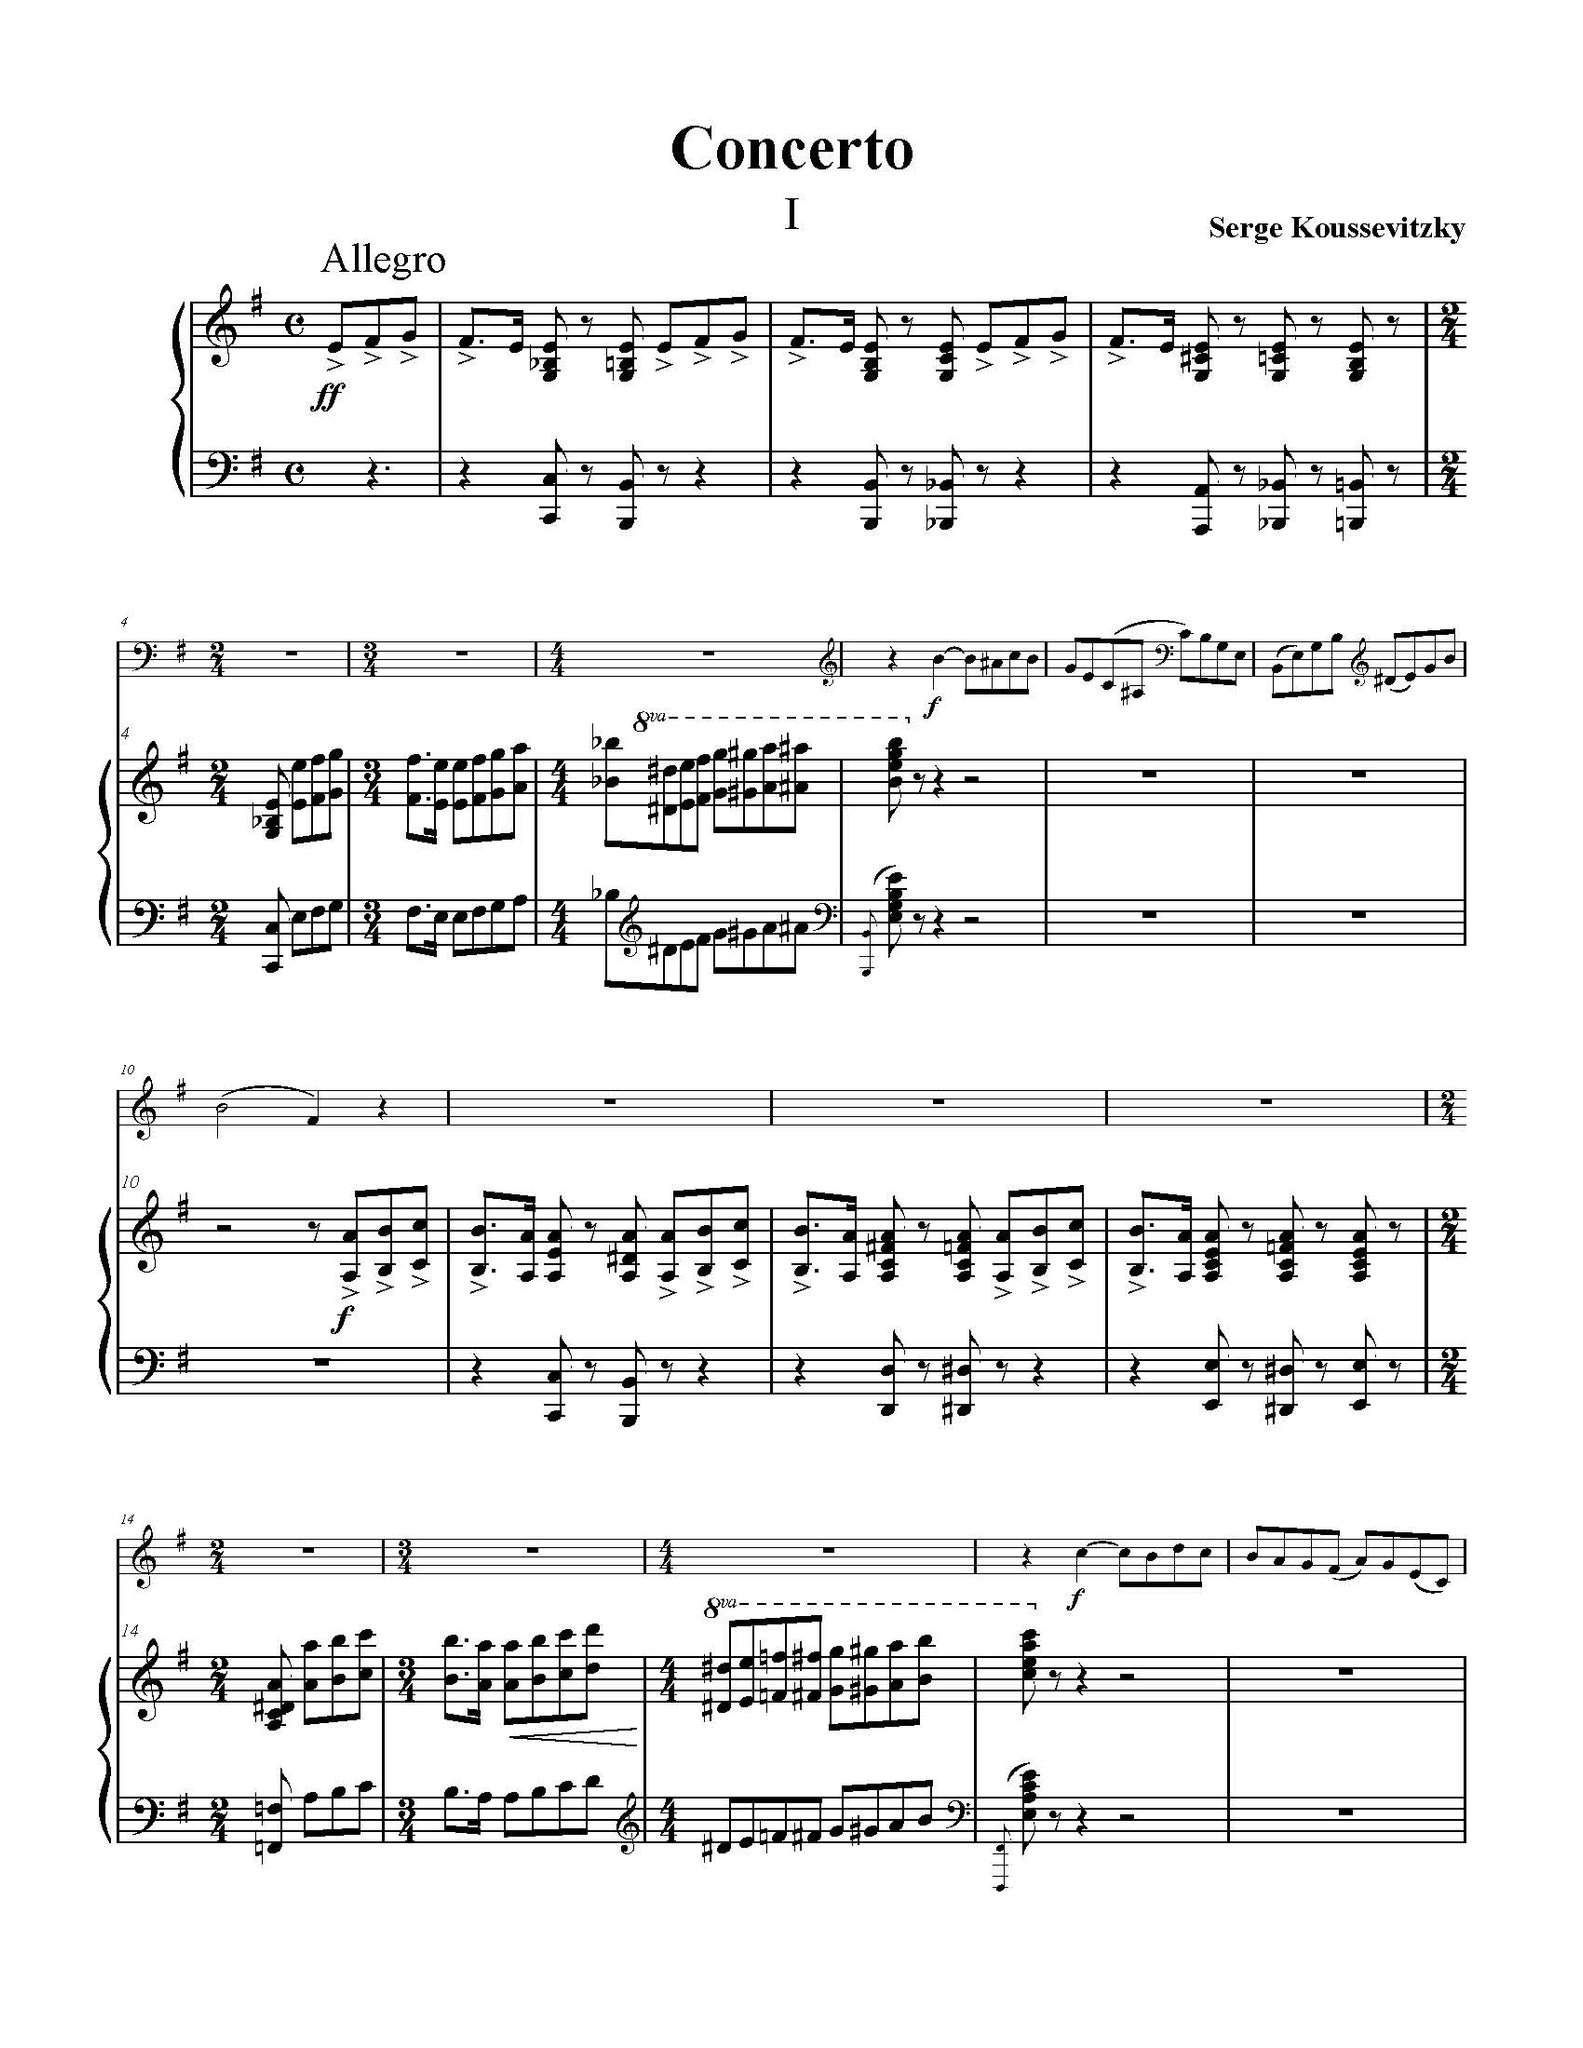 Koussevitzky Concerto orchestra tuning page 1